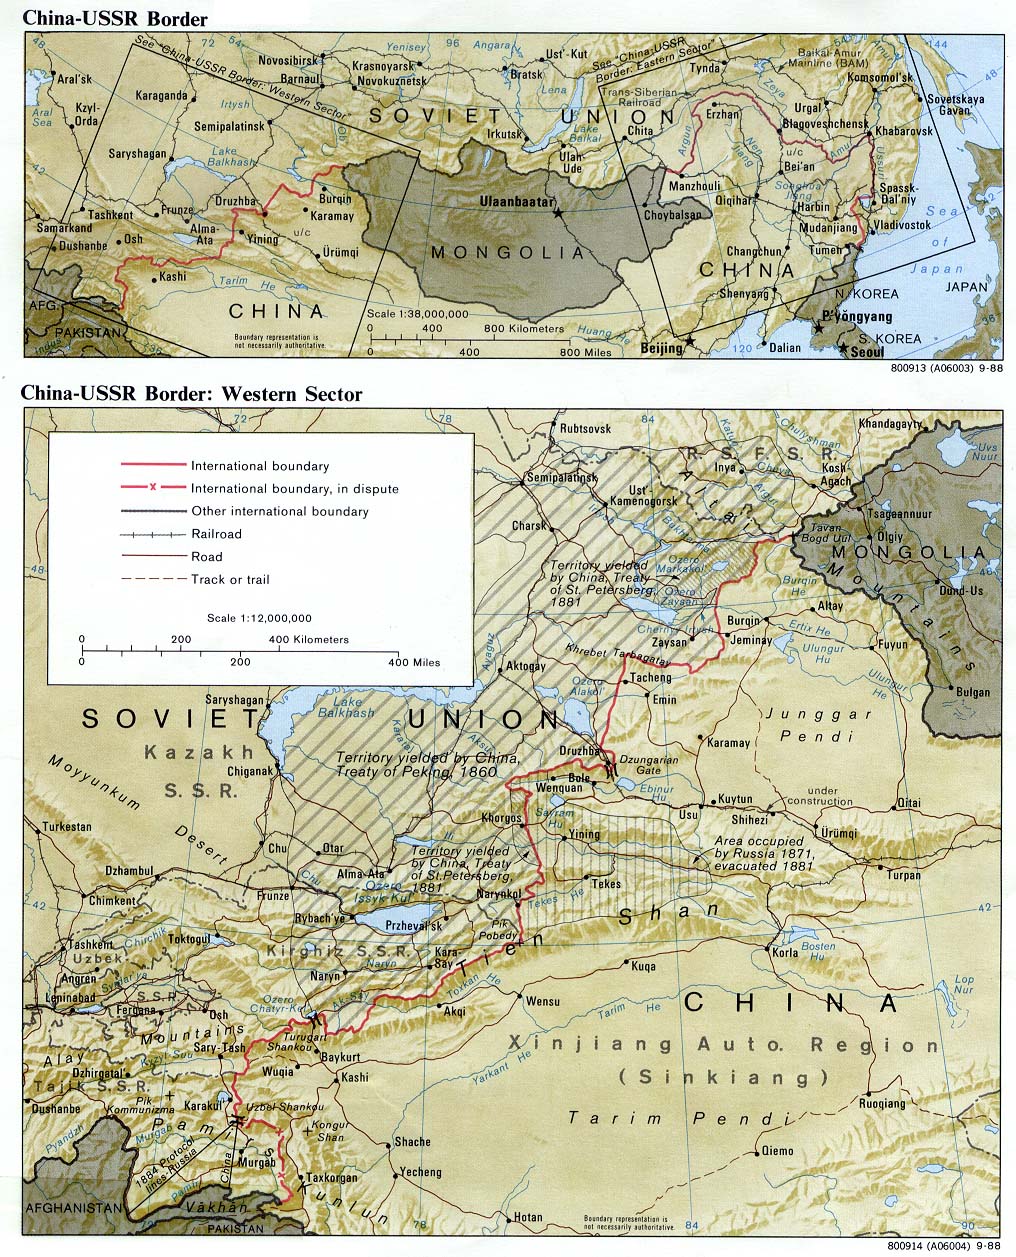 Maps of Russia, China-USSR Border: Western Sector 1988 (387K)